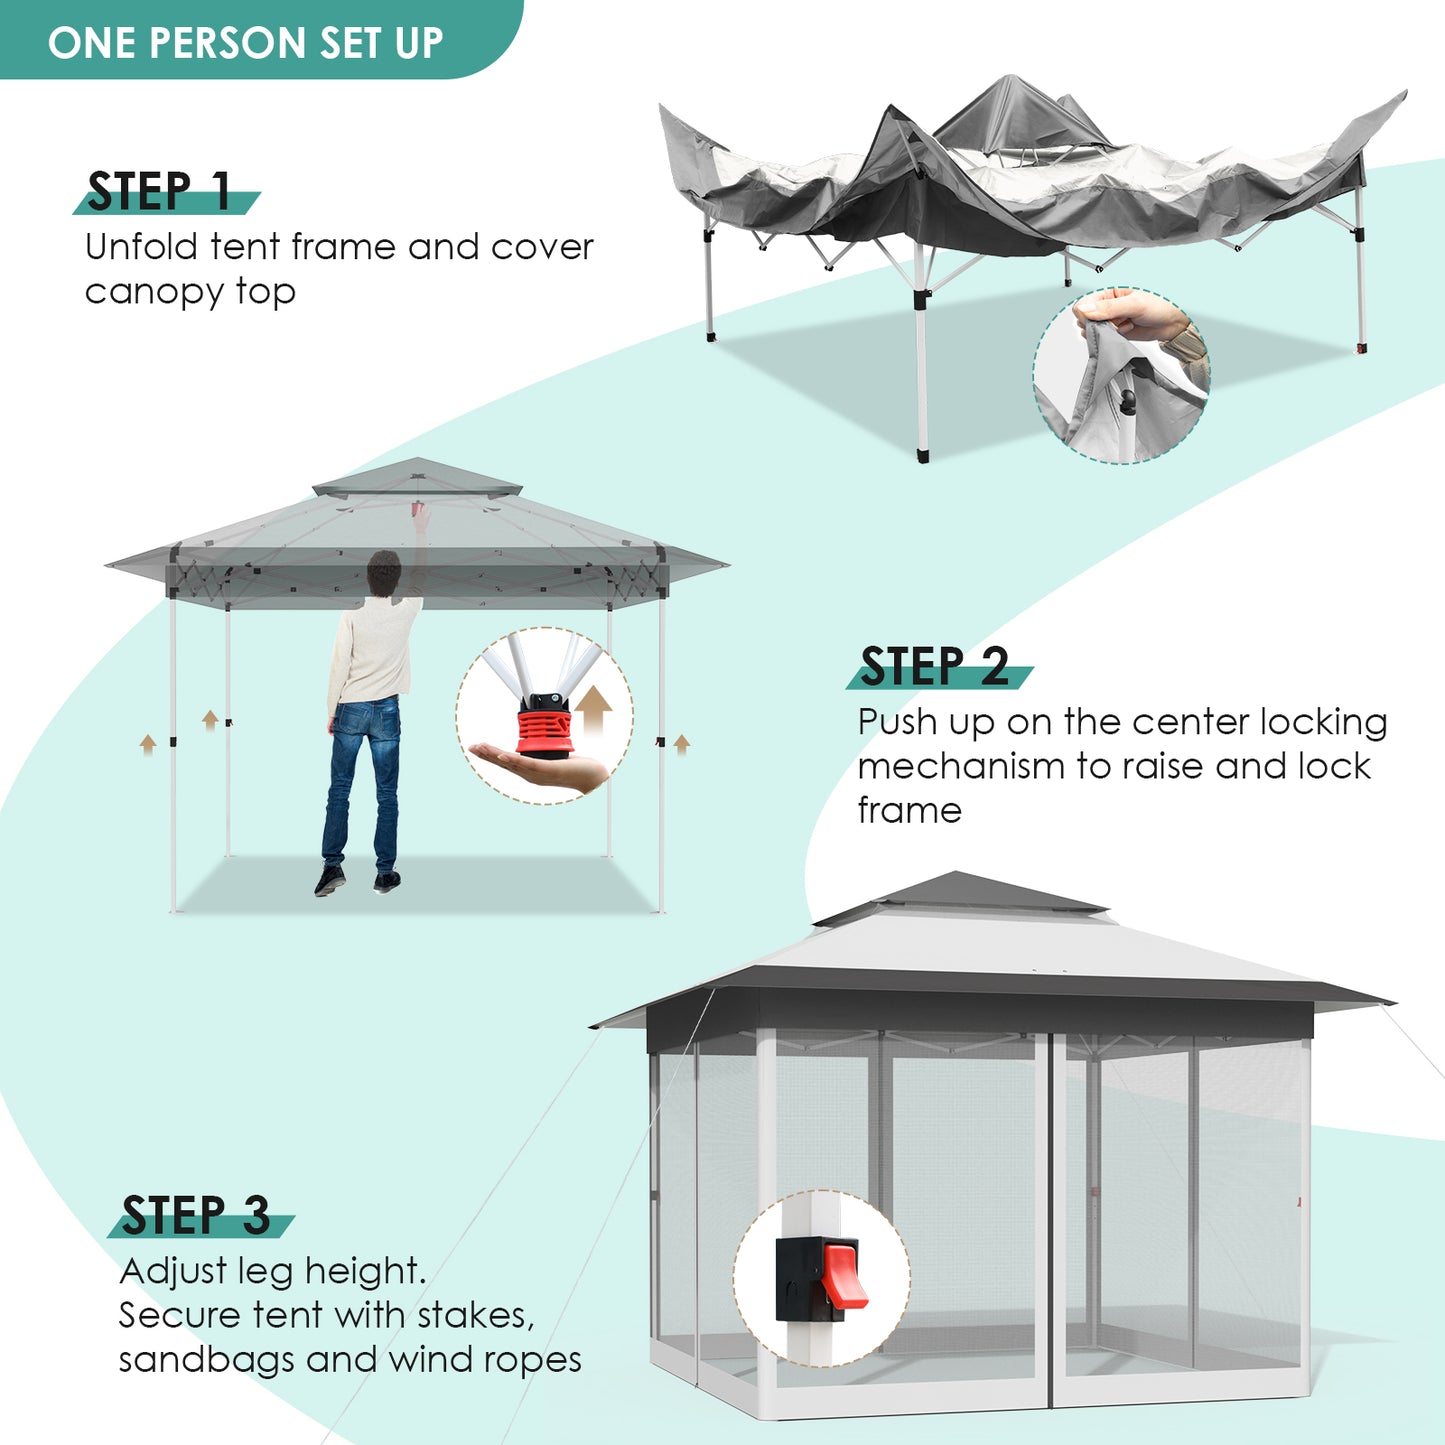 Arlopu 11'x11' Pop Up Gazebo, Outdoor Instant Canopy Tent with 4 Netting Sidewall & Auto Extending Eave, Patio Gazebos Shelter w/Mesh Wall, Center Lock, Wheeled Bag for Garden, Yard, Party, Deck